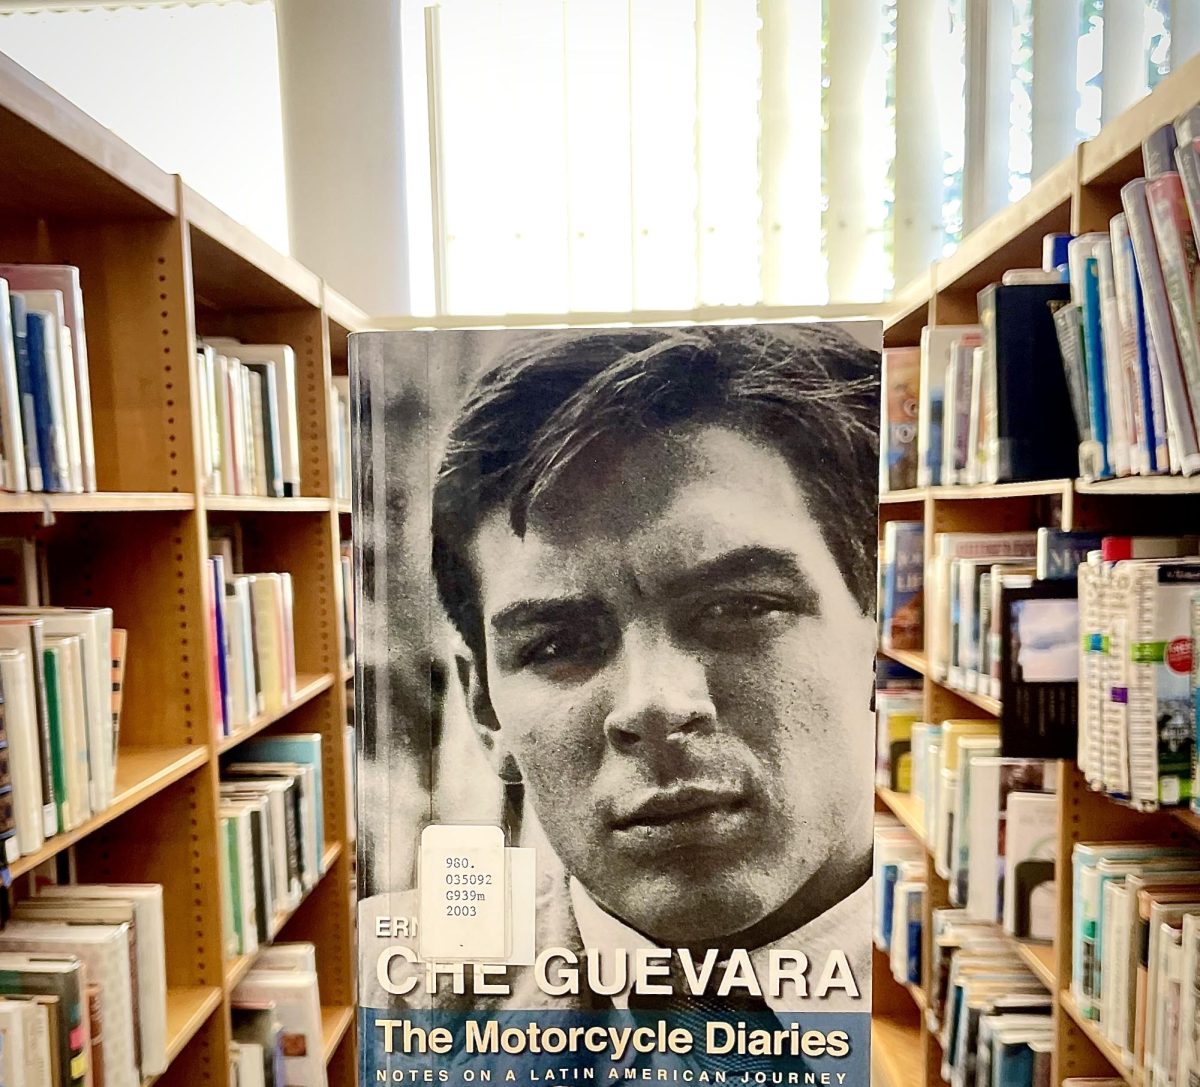 A library copy of The Motorcycle Diaries, by Ernesto (Che) Guevara, held up between rows of books, on March 3 inside of E.P. Foster Library in Ventura, Calif.